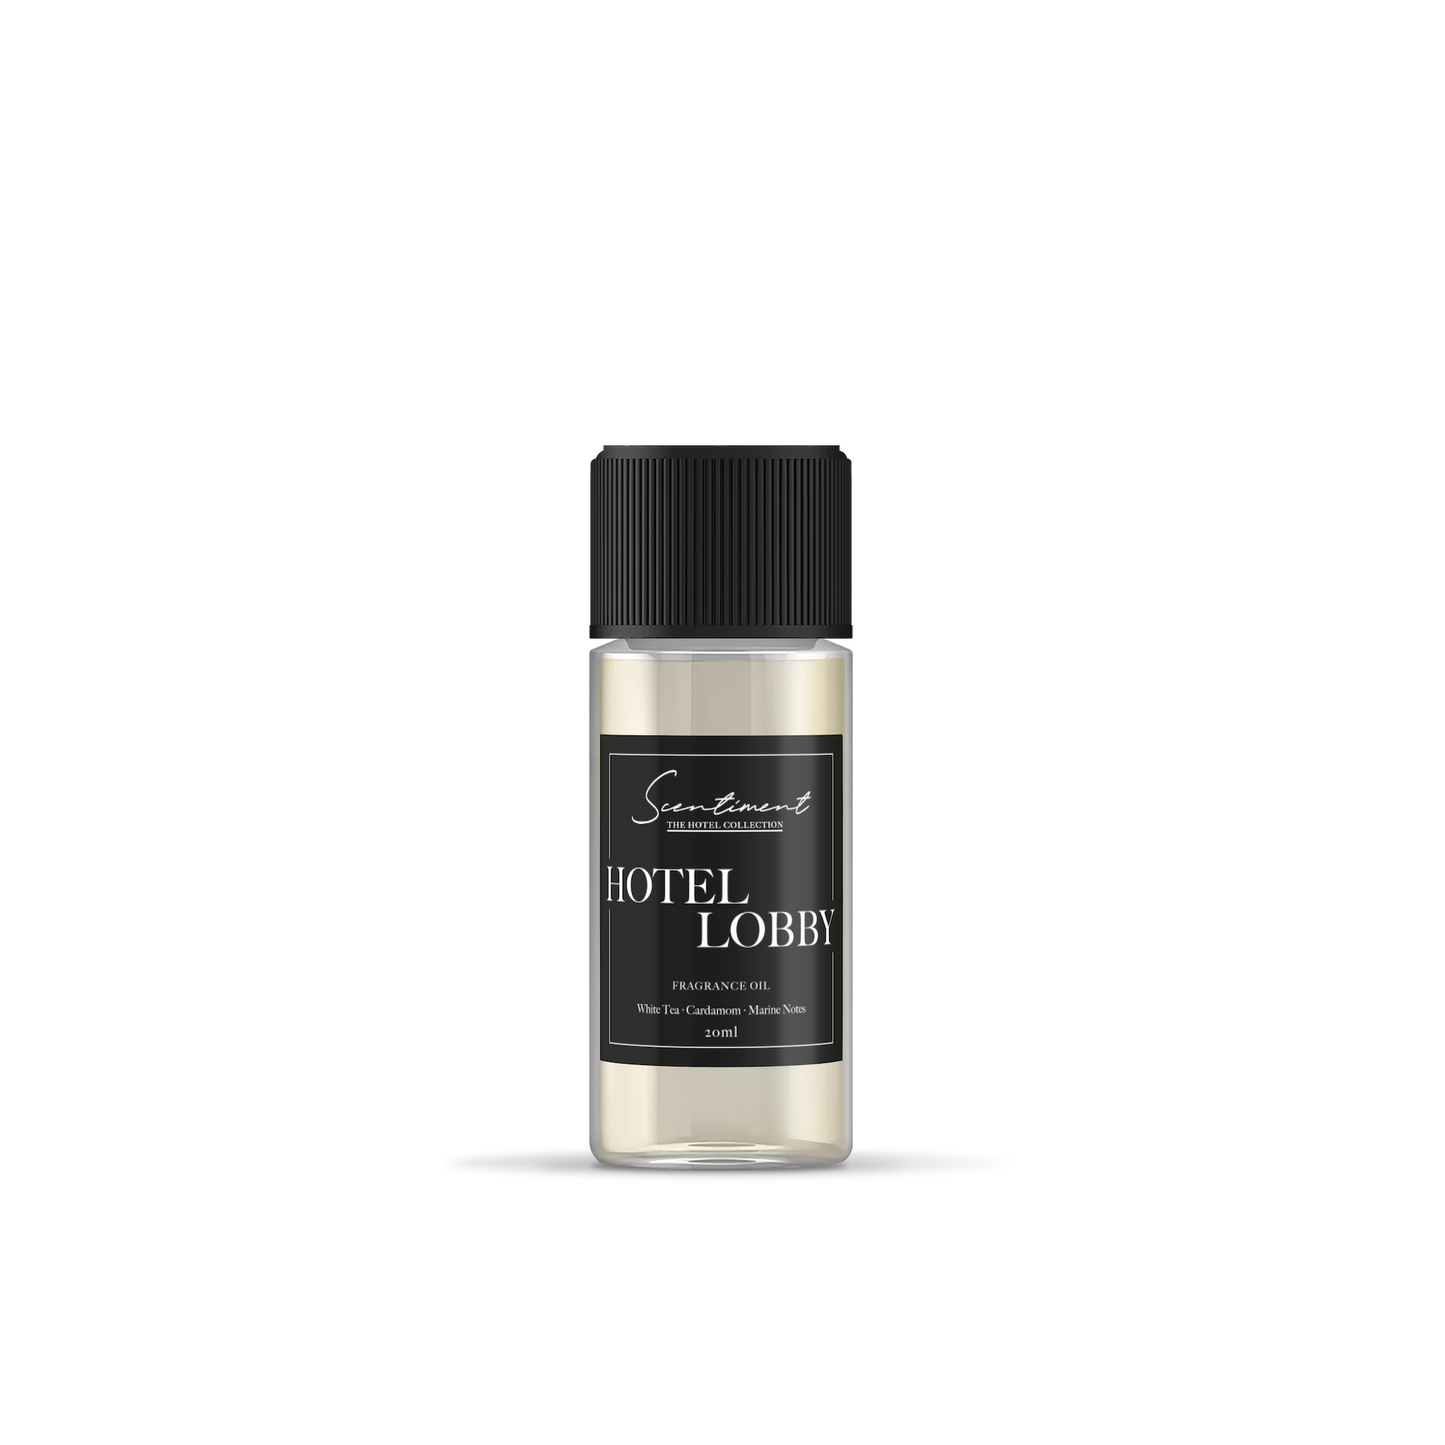 Hotel Lobby Fragrance Oil, inspired by Hilton® with notes of White Tea, Fig, and Roses.